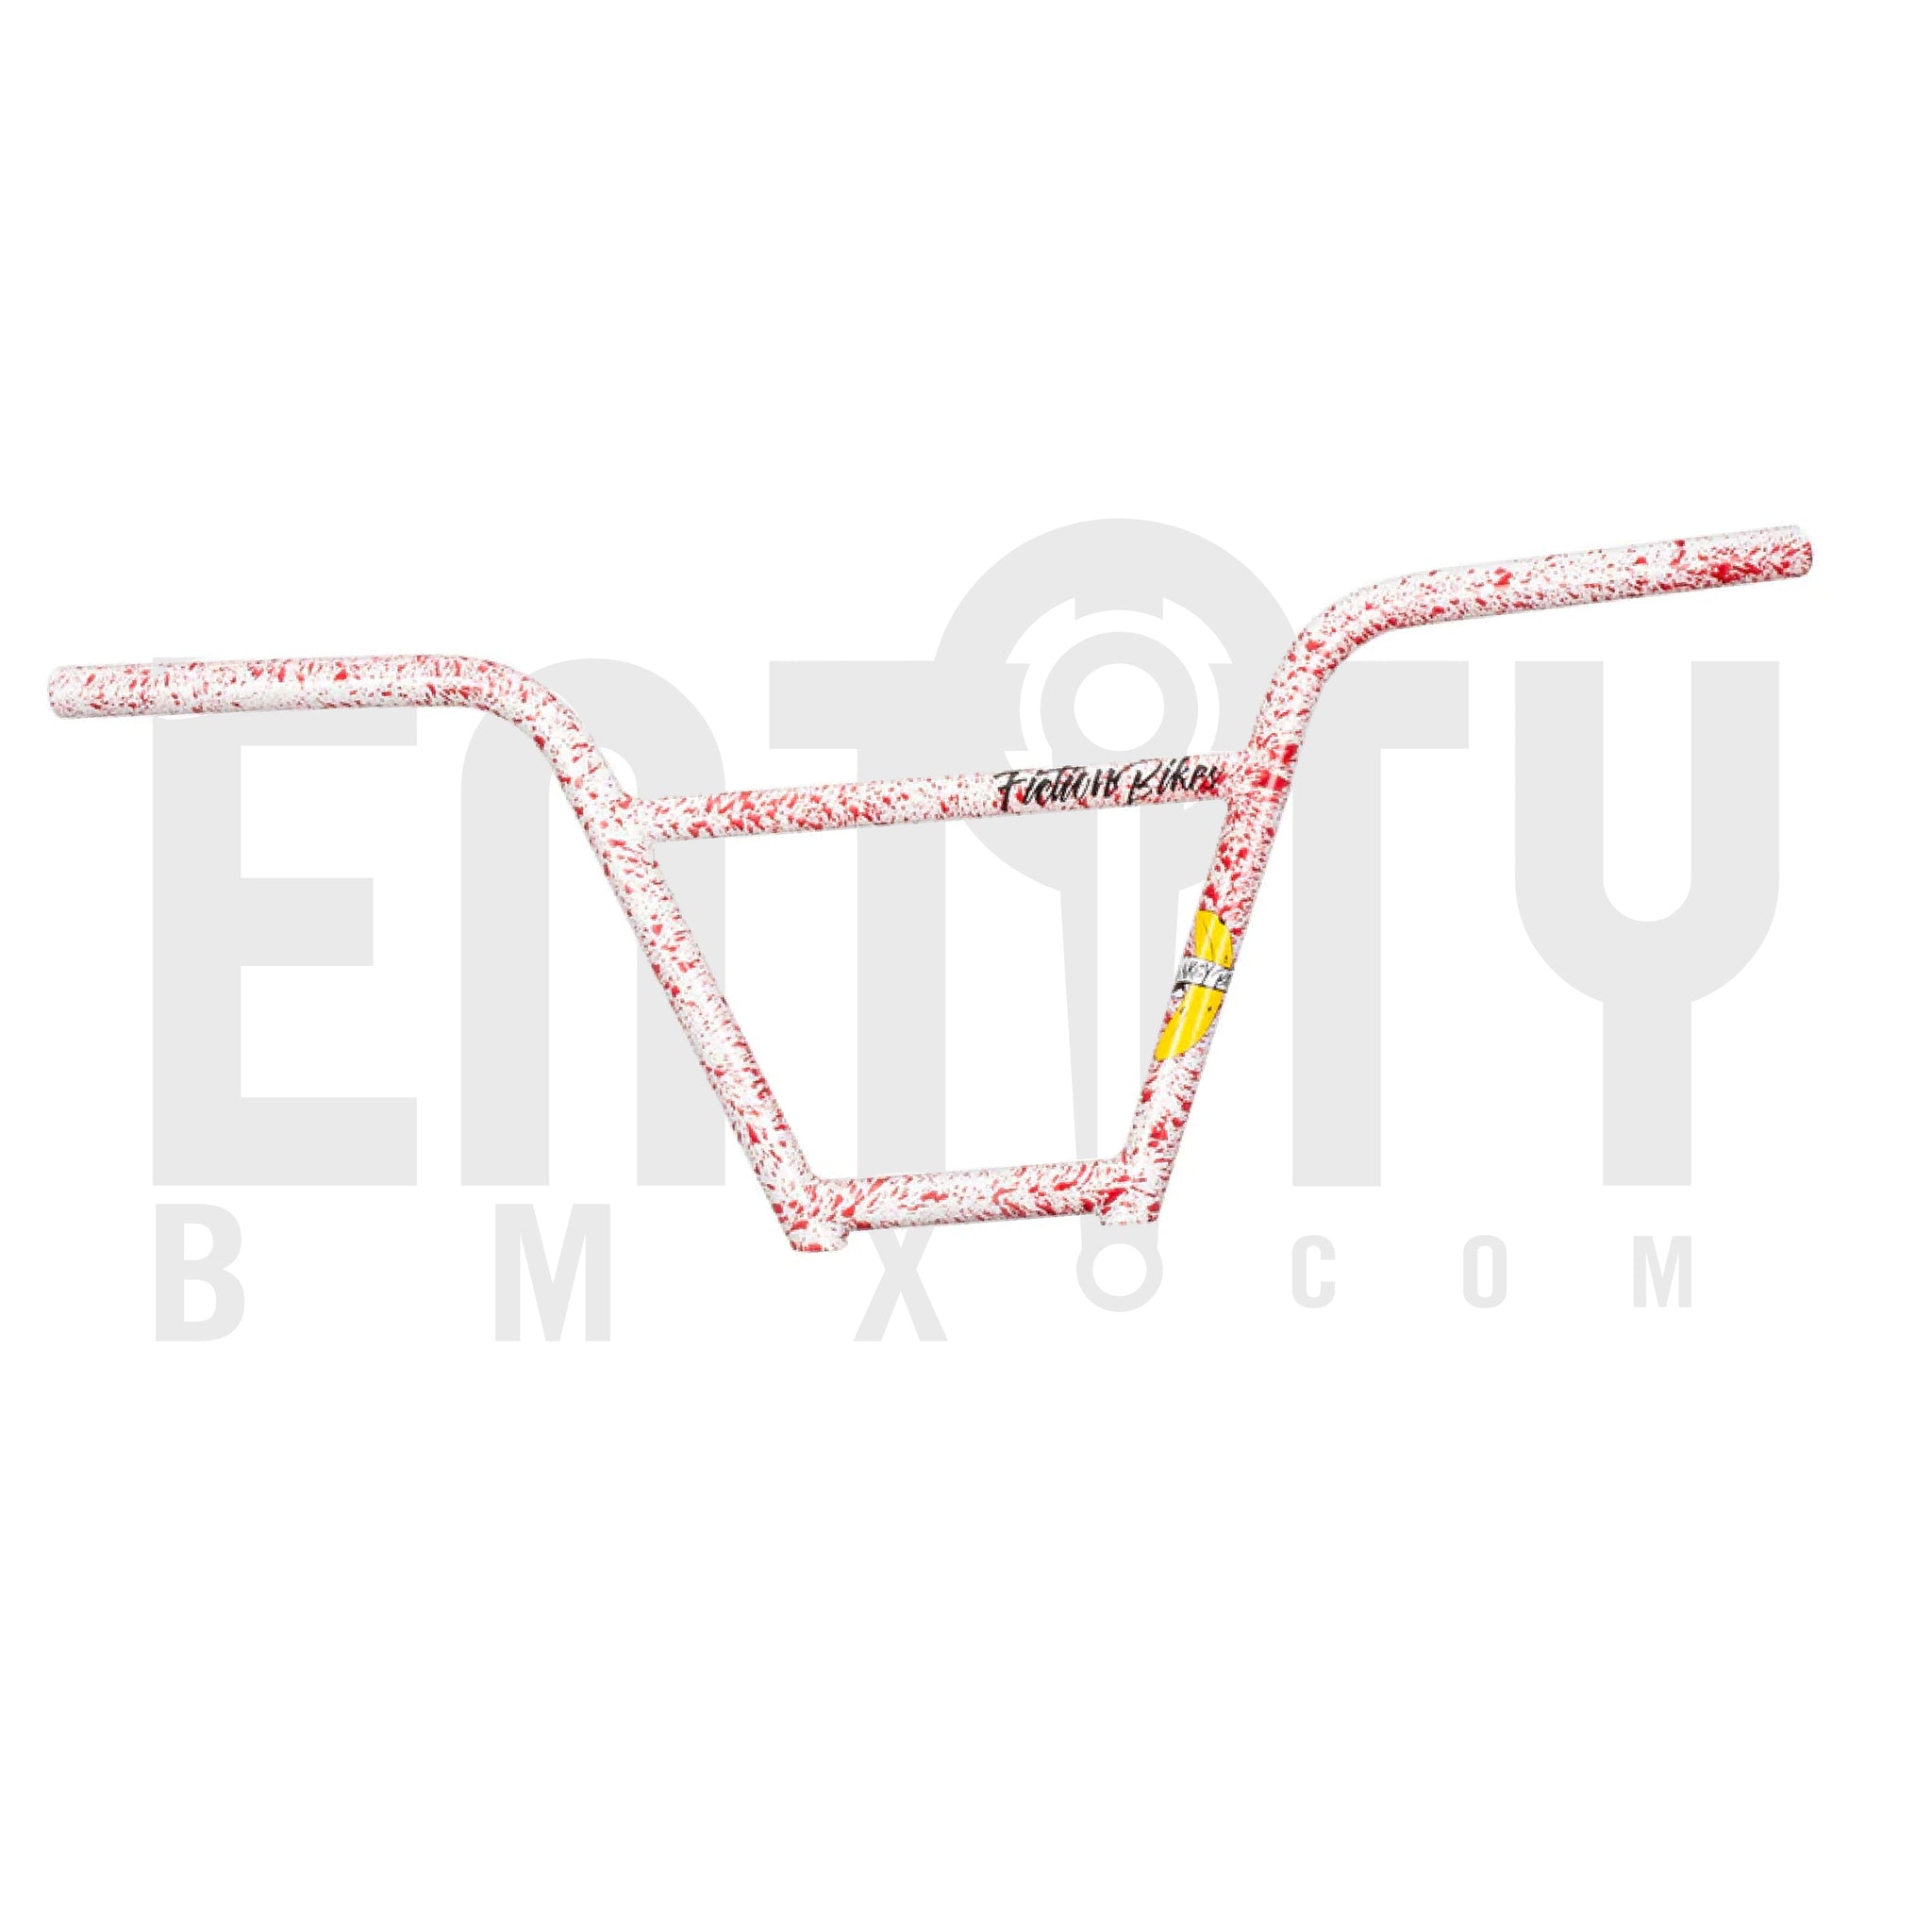 Fiction Bikes Monkey Bars PSYCHO edition, White with blood spatter